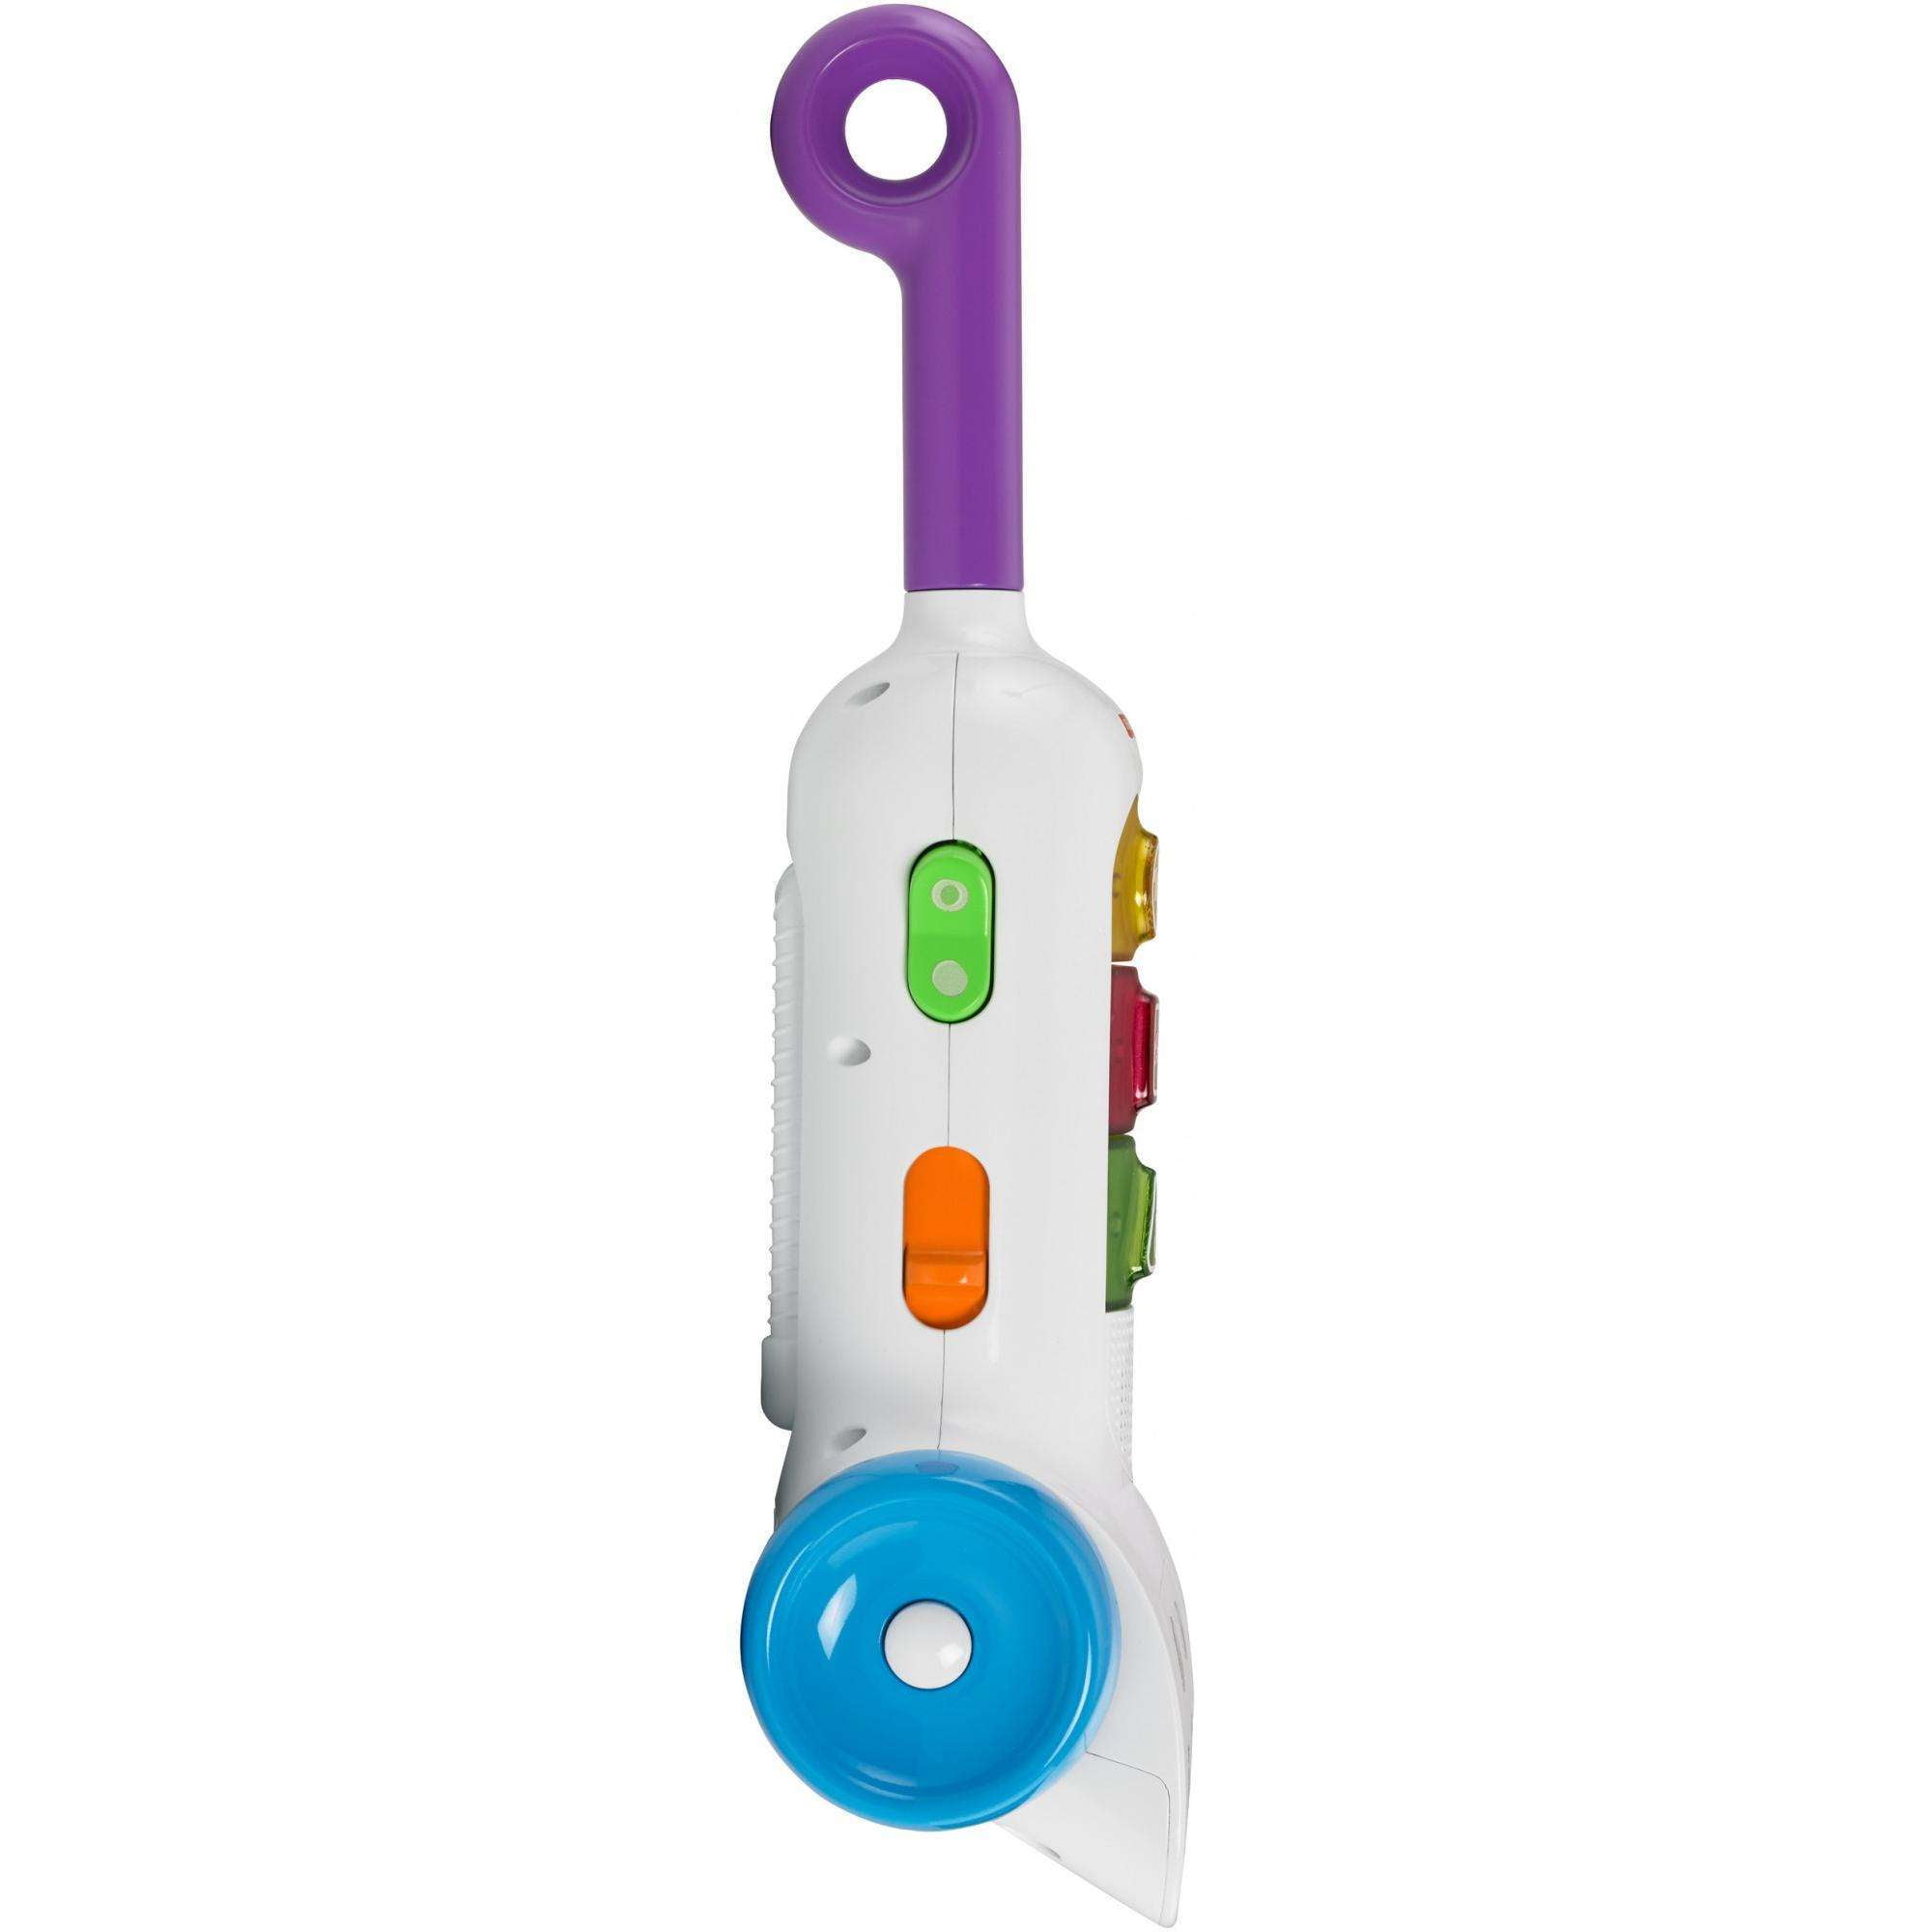 Fisher-Price Laugh and Learn Toddler Toy Vacuum with Lights Music and Song  887961600827